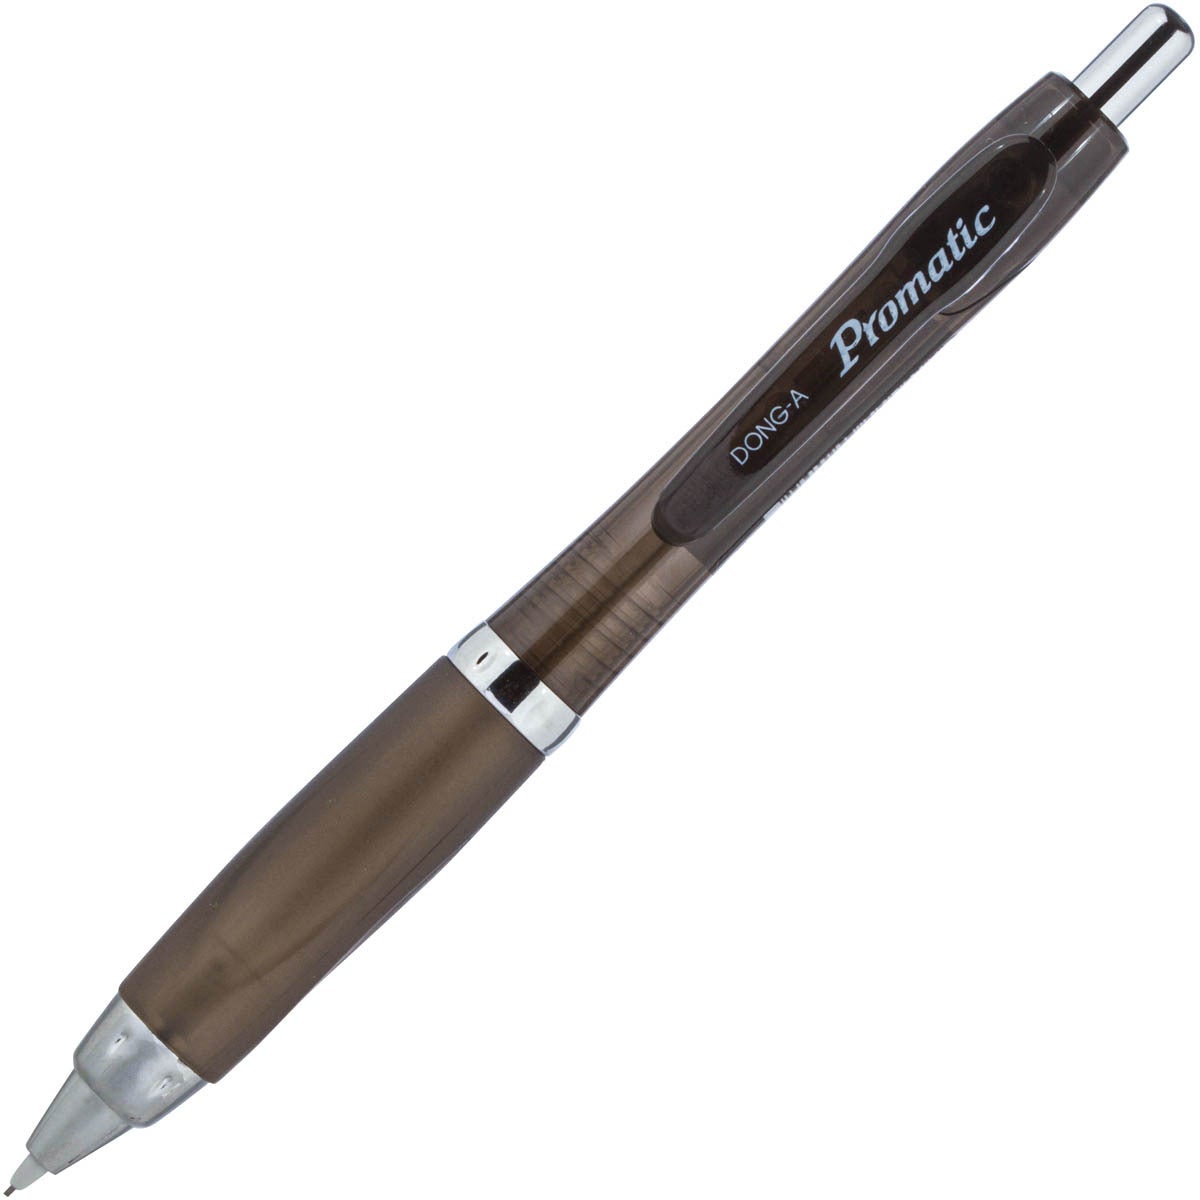 DONG-A Promatic Mechanical Pencil - Black product image 2